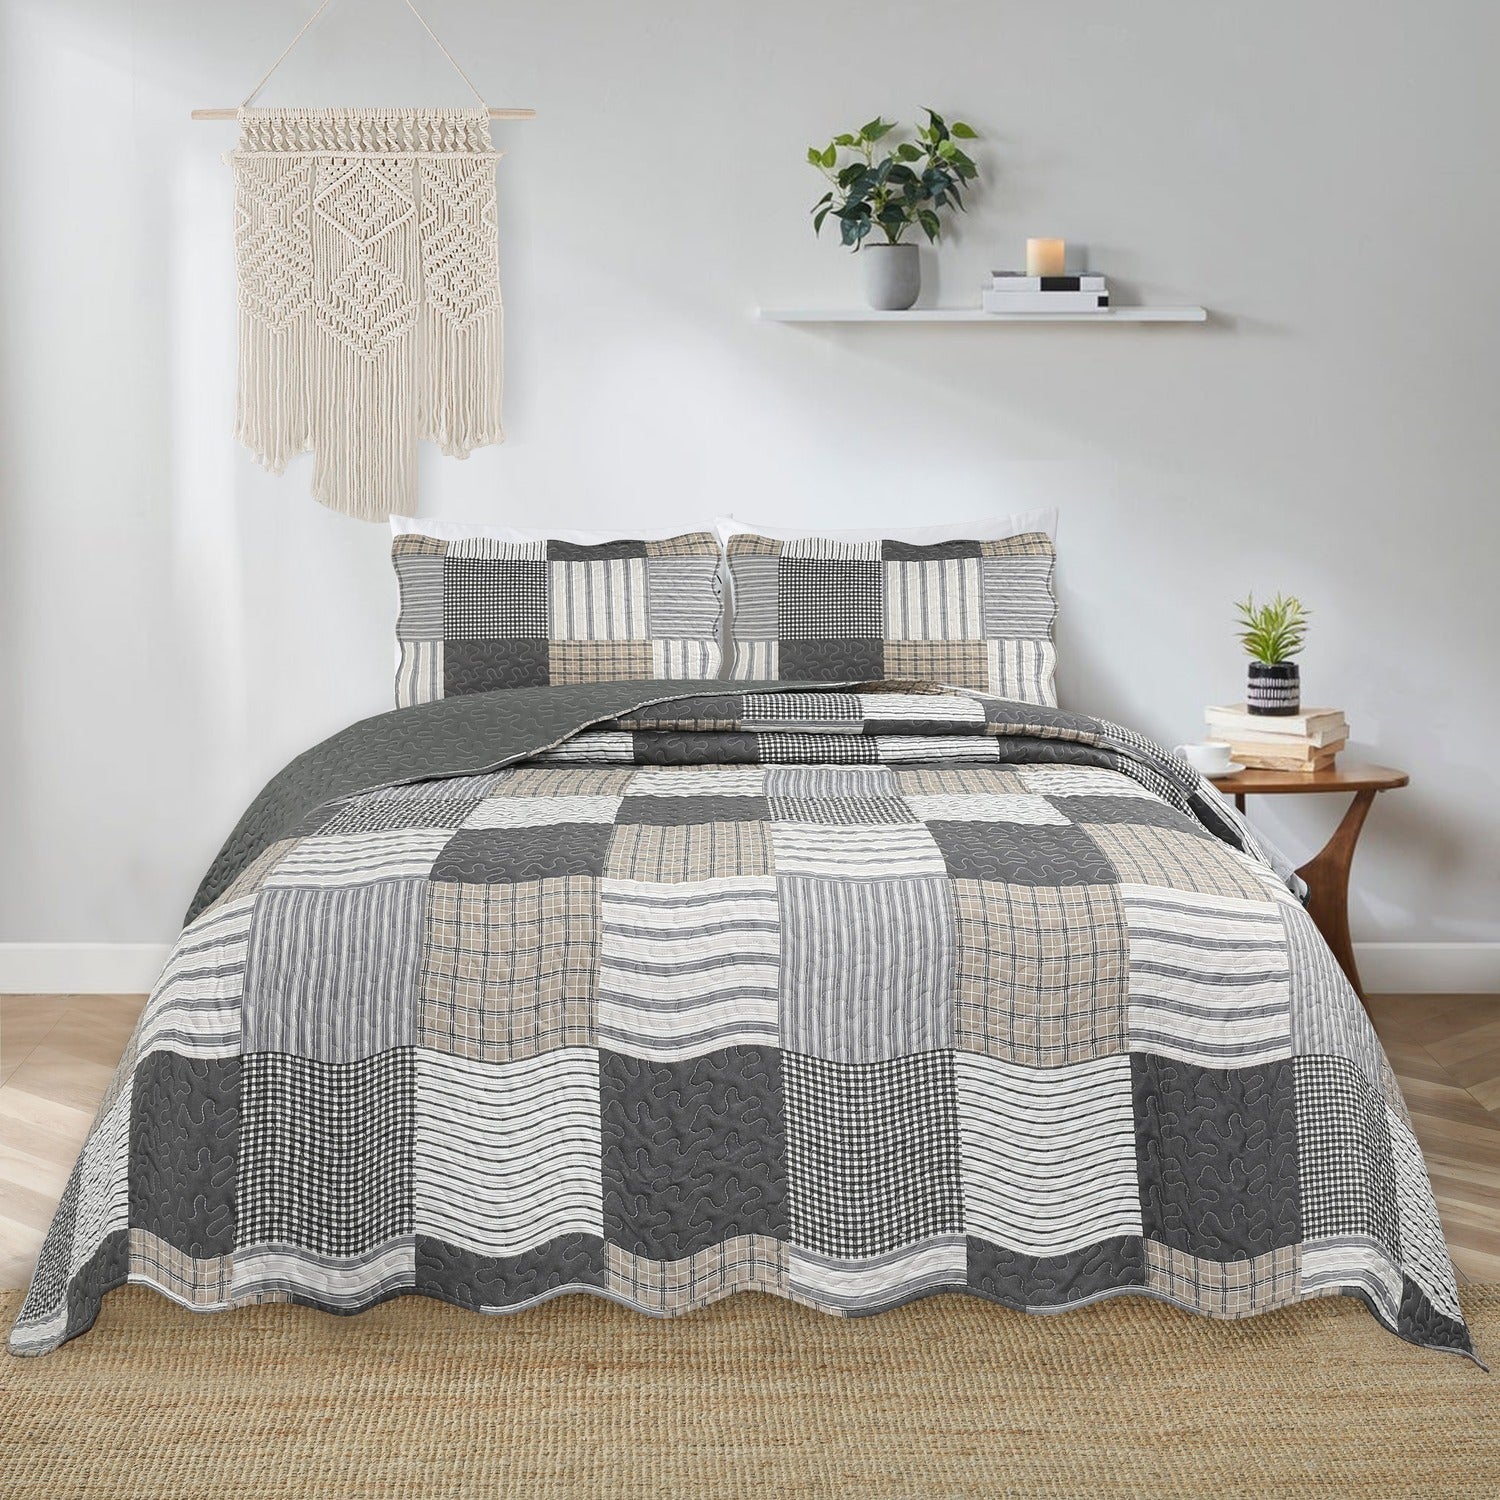 Stripe Abstract Brown 3pc Bedspread Quilt Set. Stitch Quilted Coverlet Set, Neutral Solid Quilt Set for Bedroom, Microfiber